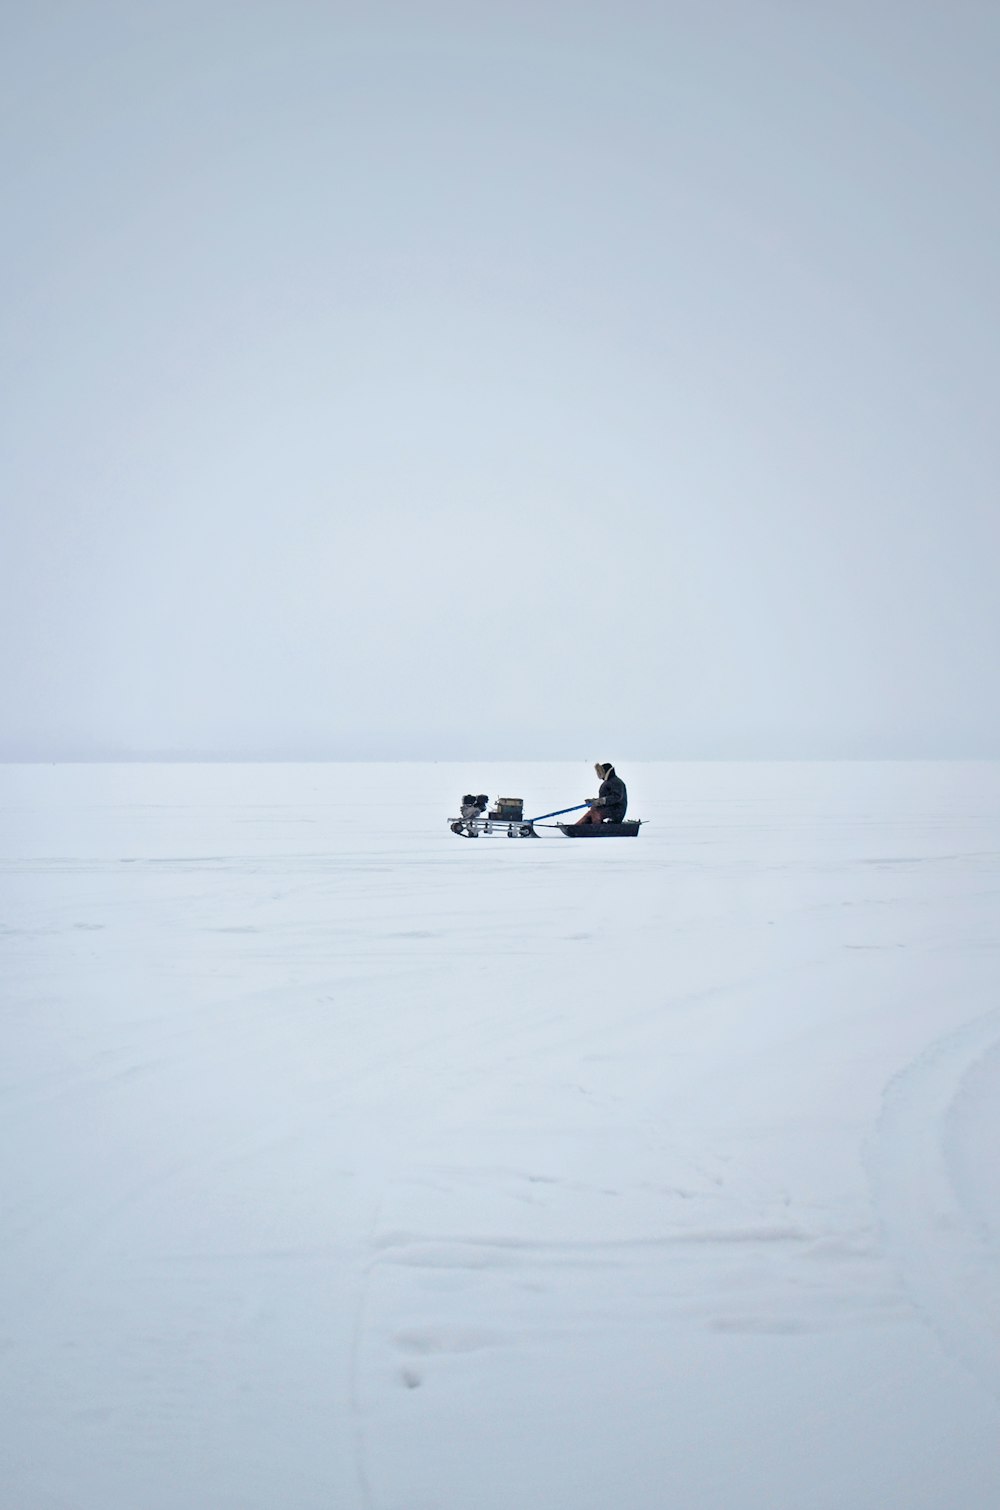 man riding pulled sled in the middle of snowy field